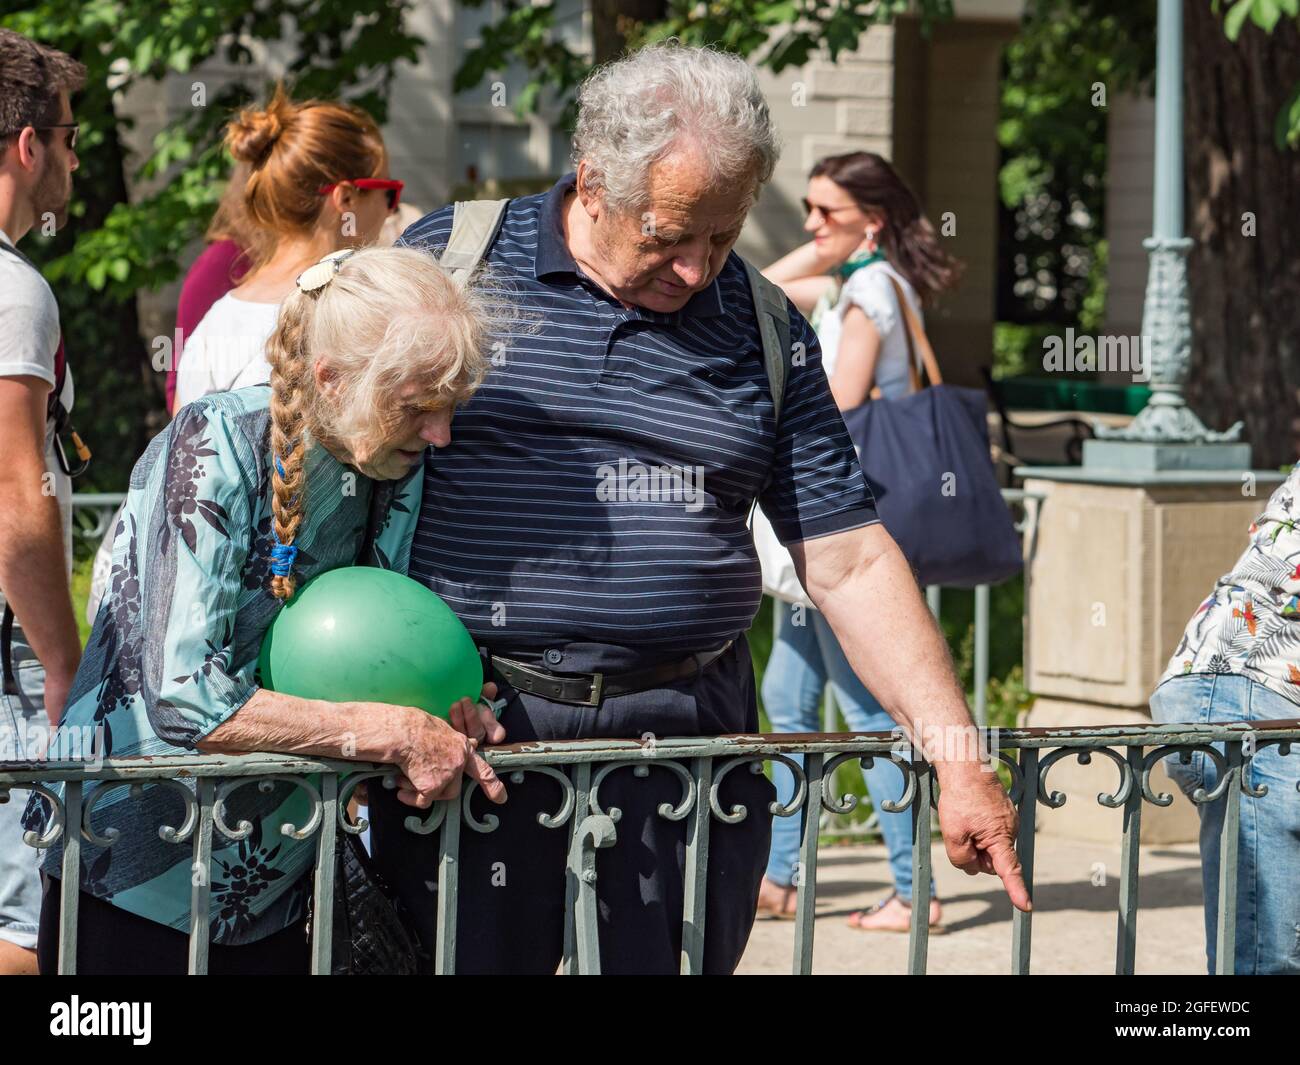 Happy elderly man and woman in the park.  Royal Bath Park. Warsaw, Poland. Seniority concept Stock Photo